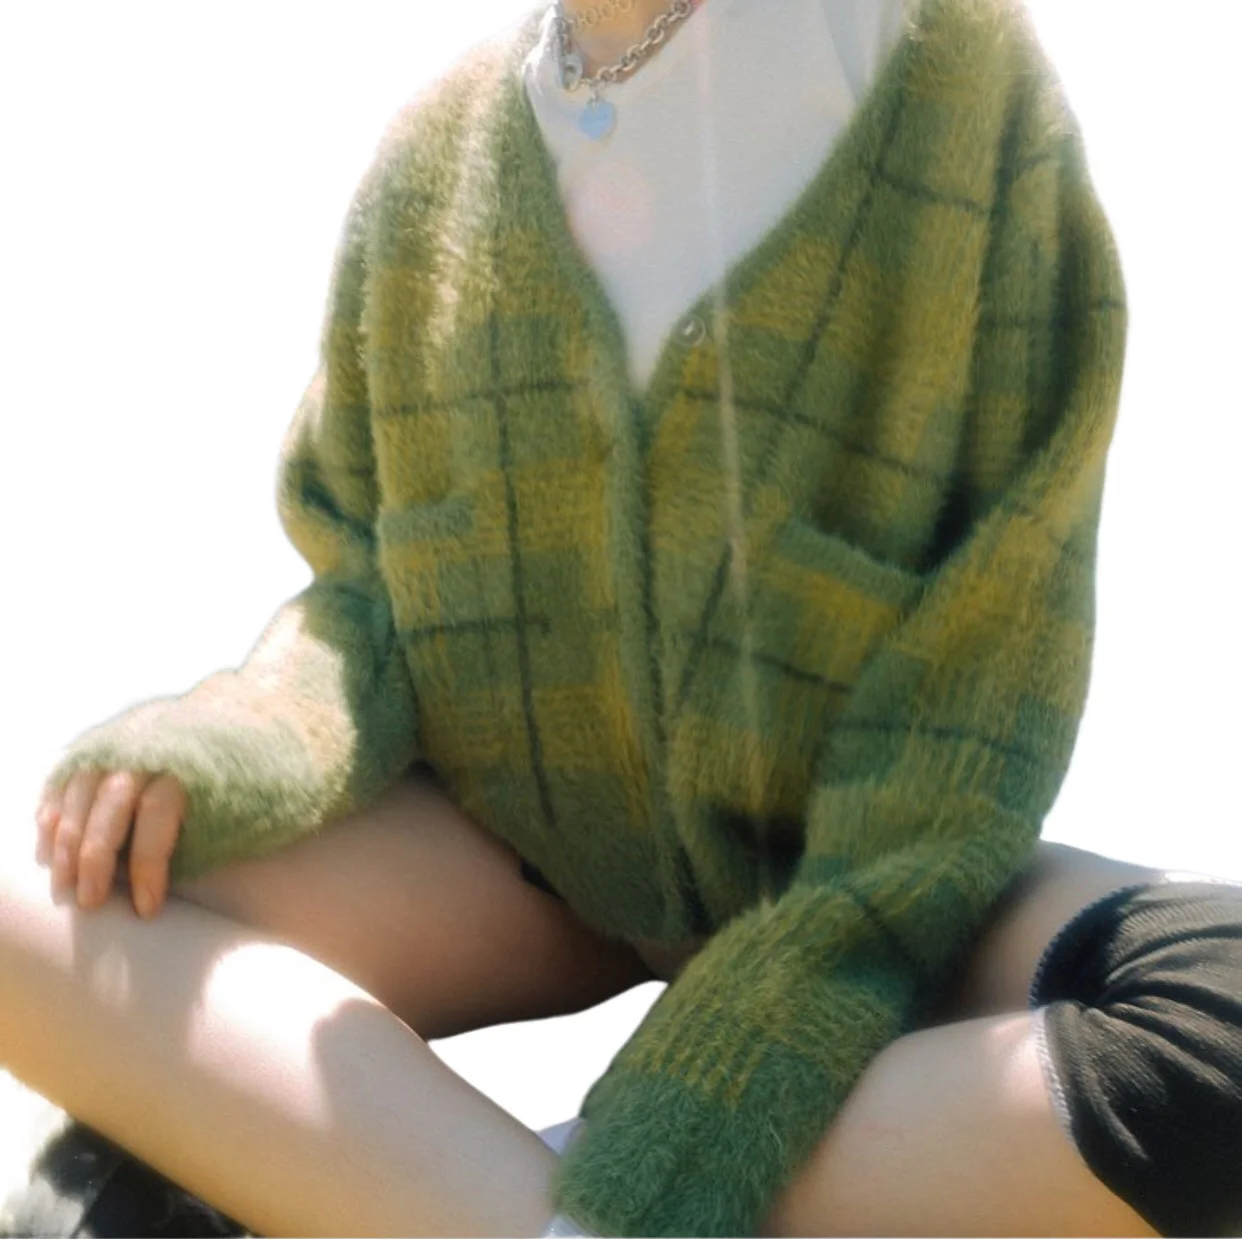 

Vintage Mohair Sweater Women Knitted Cardigans Harajuku Lazy Style Ladies V-Neck Button Fuzzy Plaid Cardigan Fluffy Knitwear Top